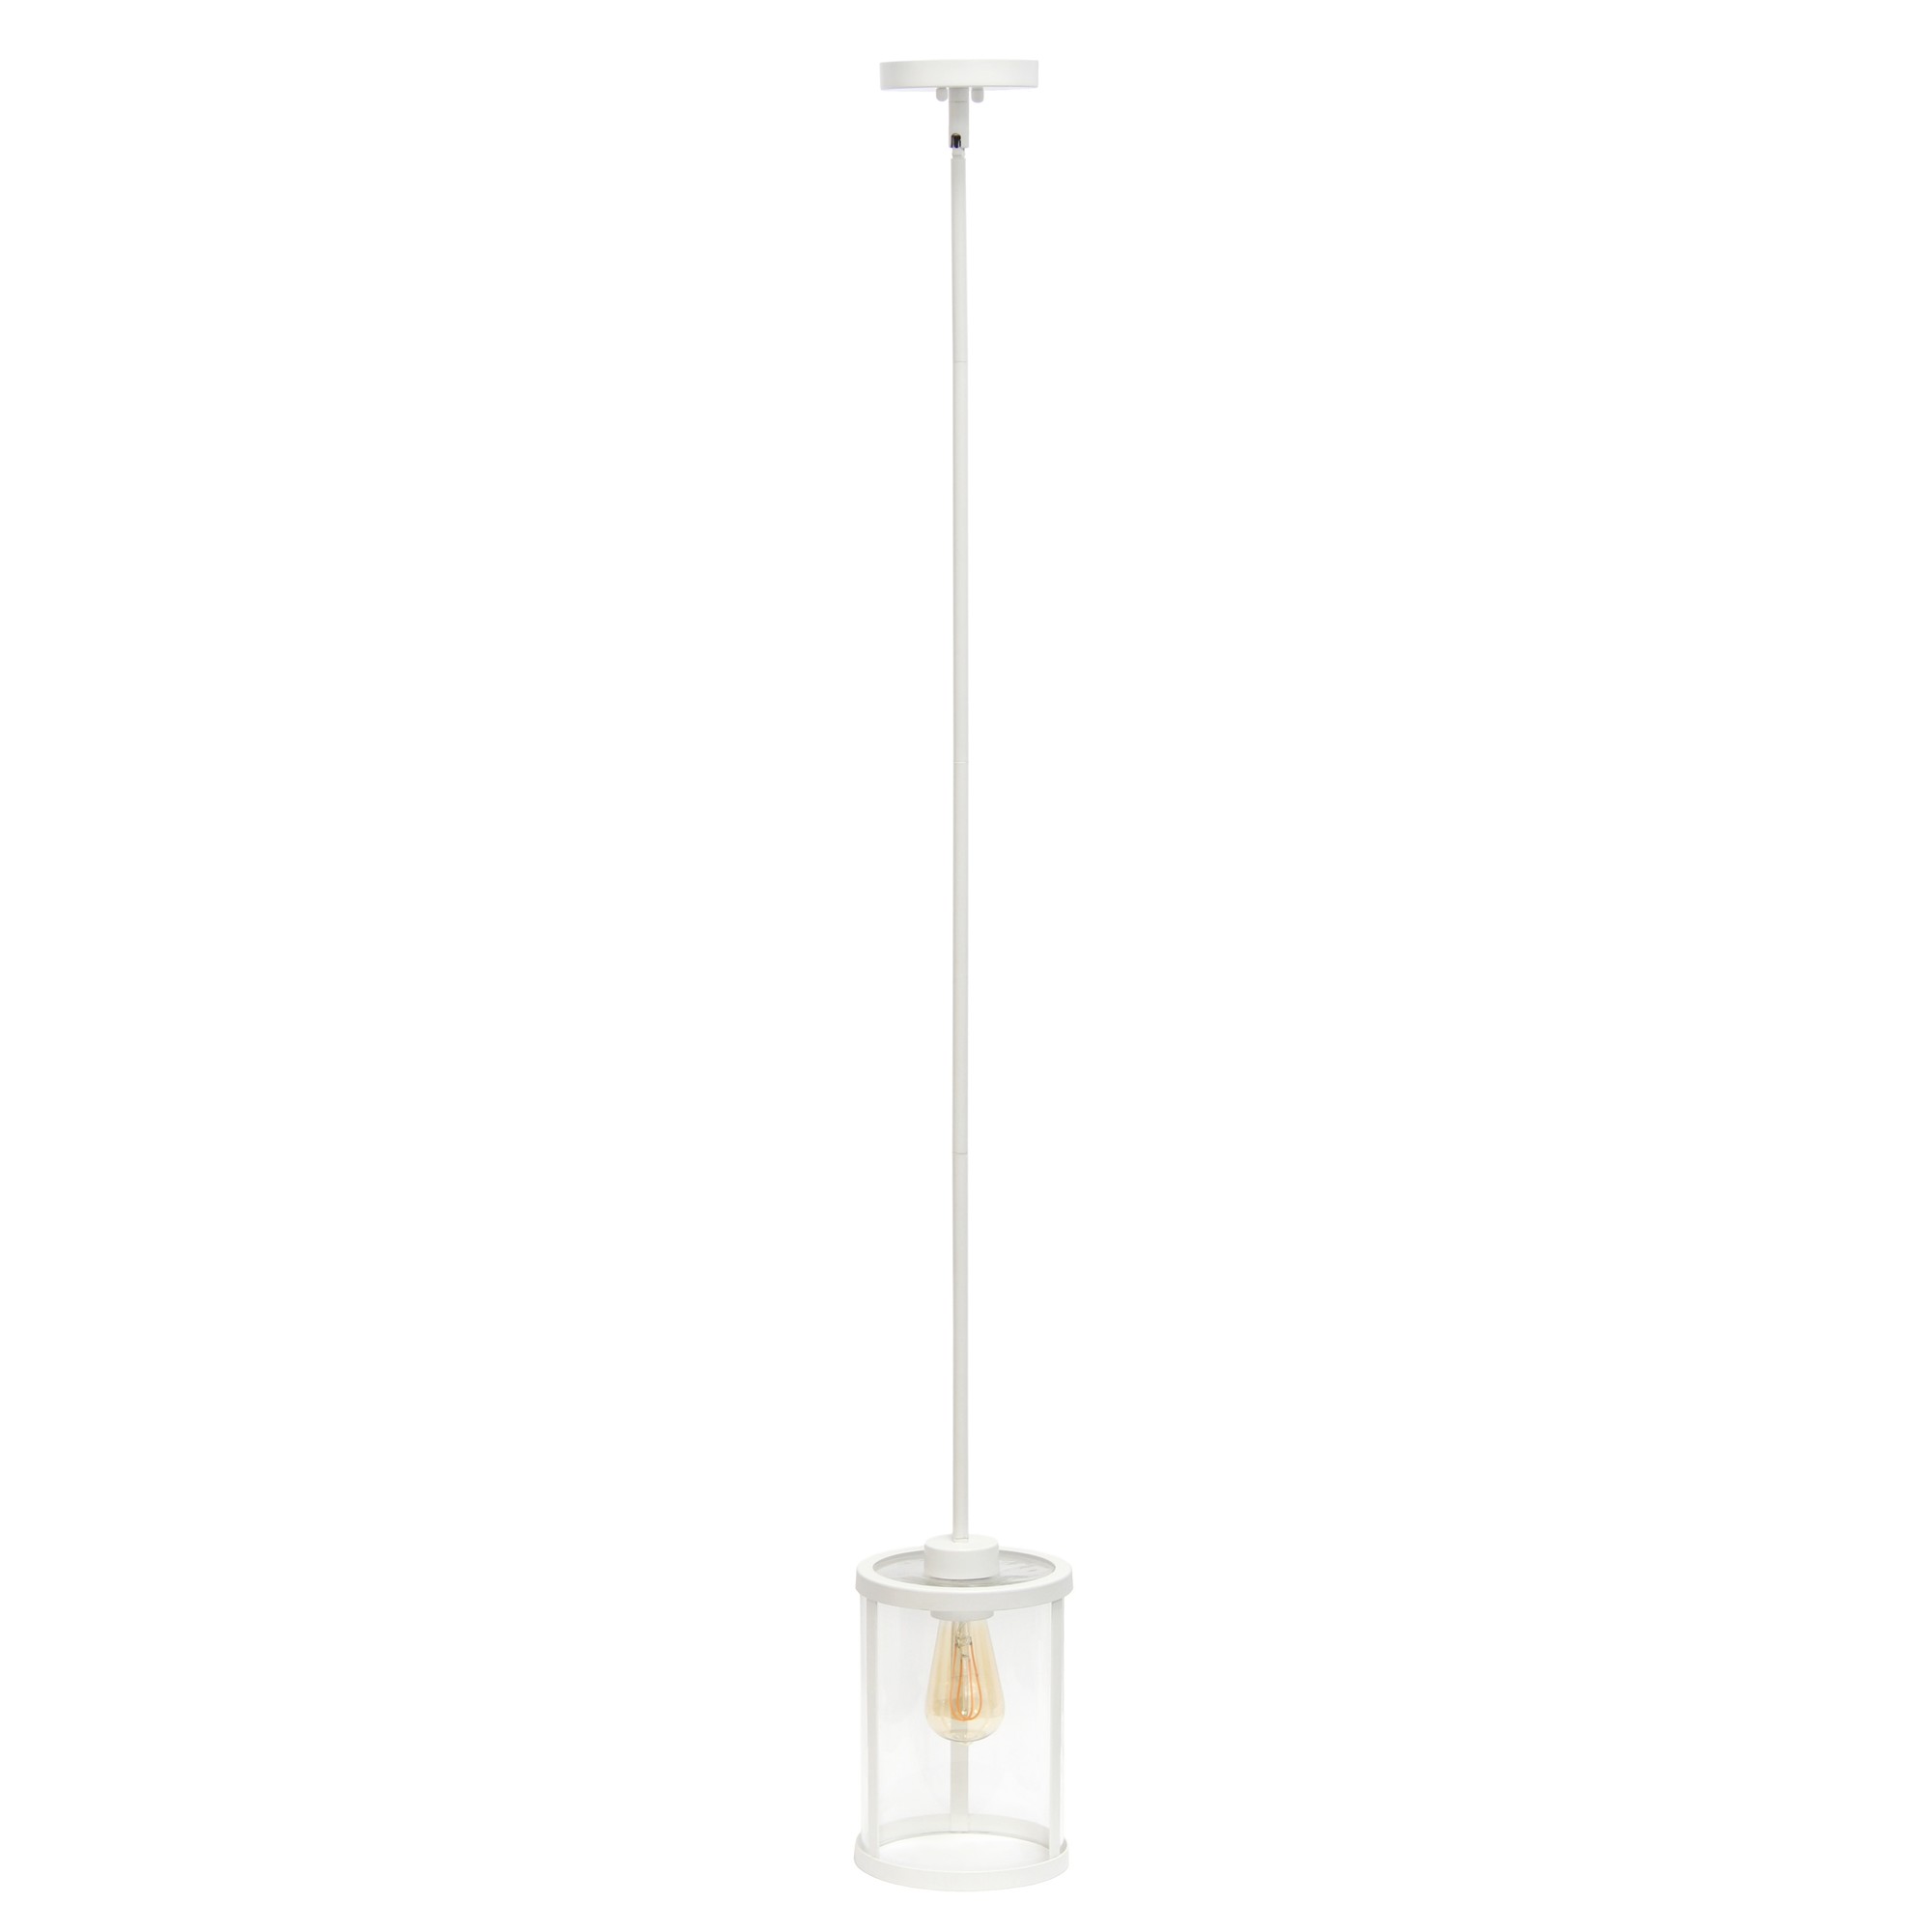 Lalia Home 1-Light 9.25" Modern Adjustable Hanging Cylindrical Clear Glass Pendant Fixture with Metal Accents, White